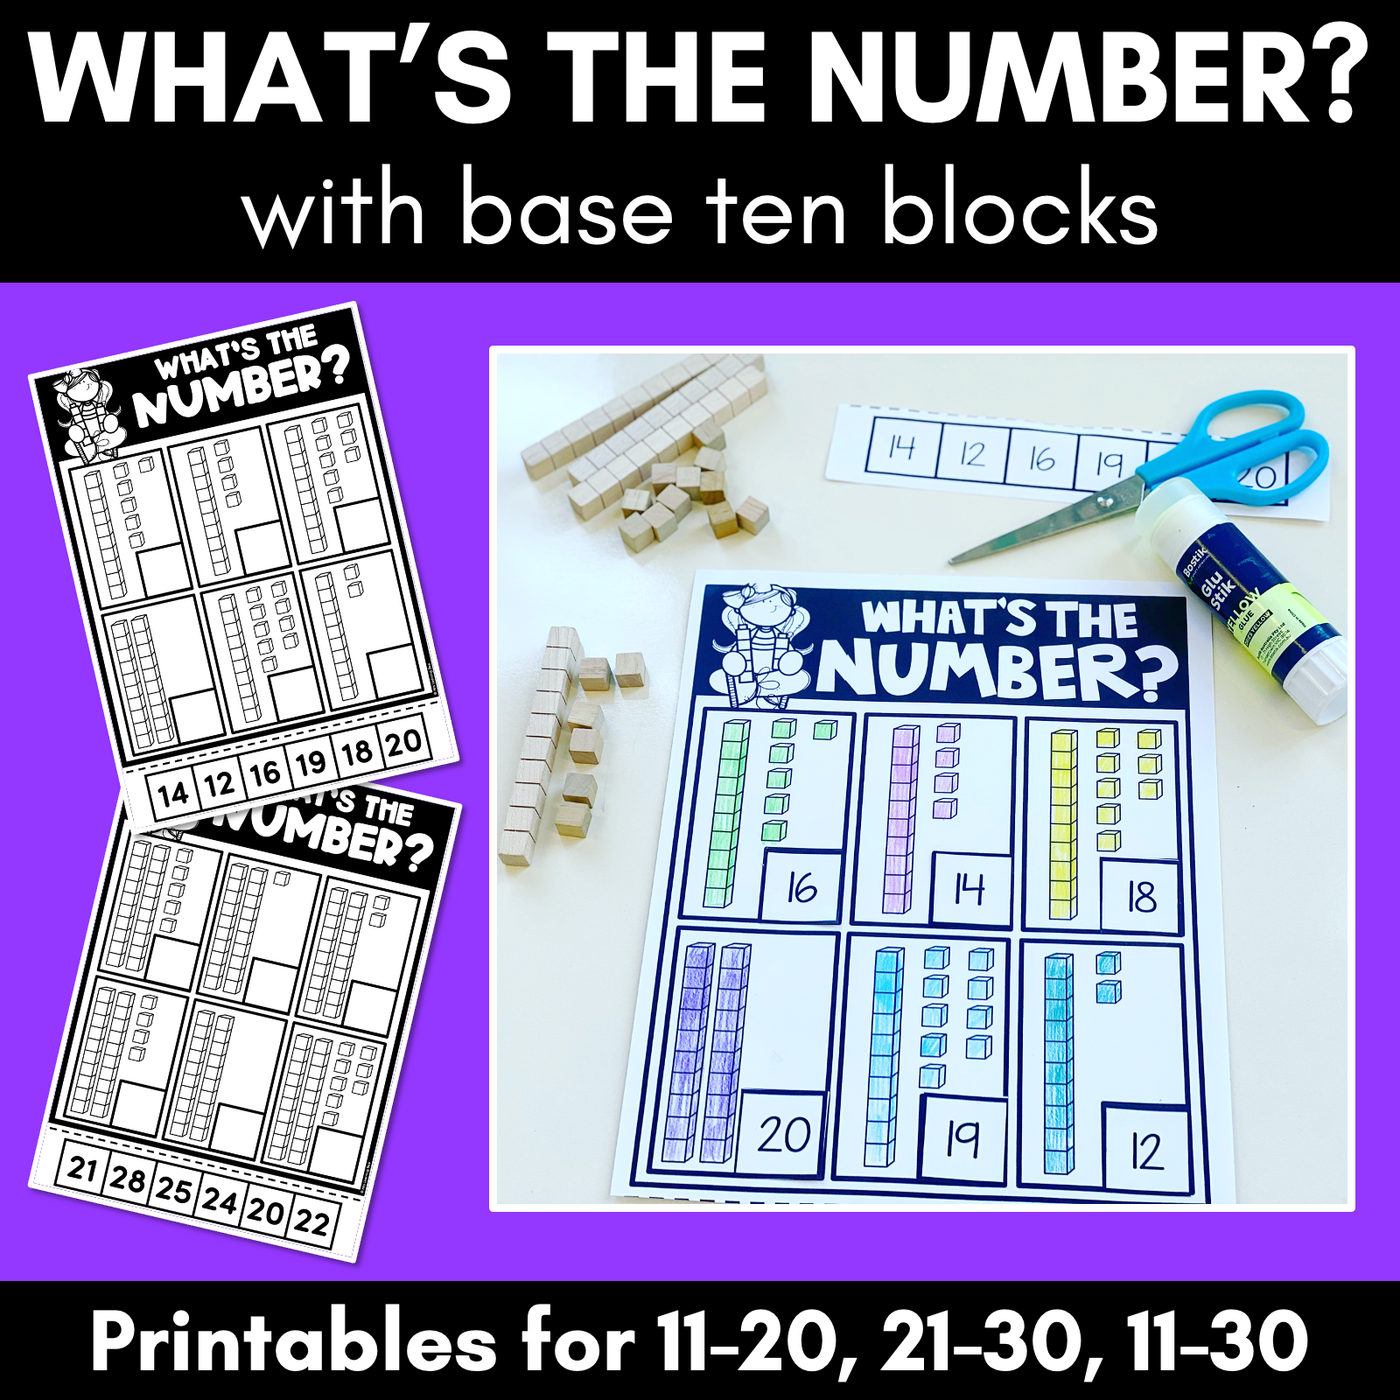 What's the Number with base ten blocks - 11-20, 21-30 and 11-30